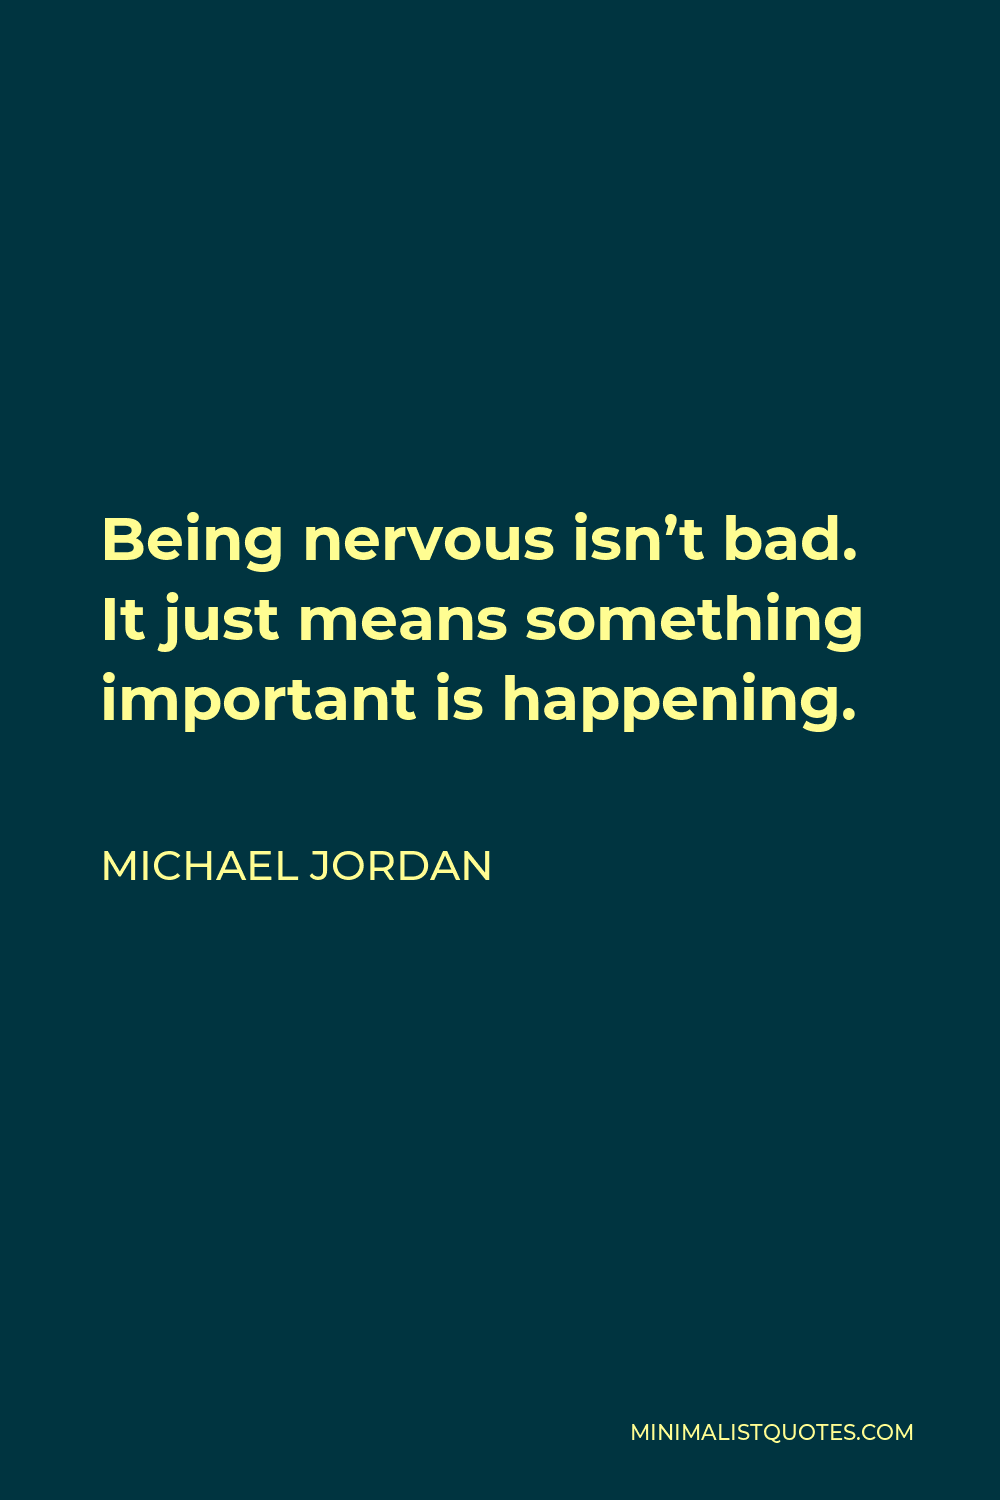 Michael Jordan Quote - Being nervous isn’t bad. It just means something important is happening.